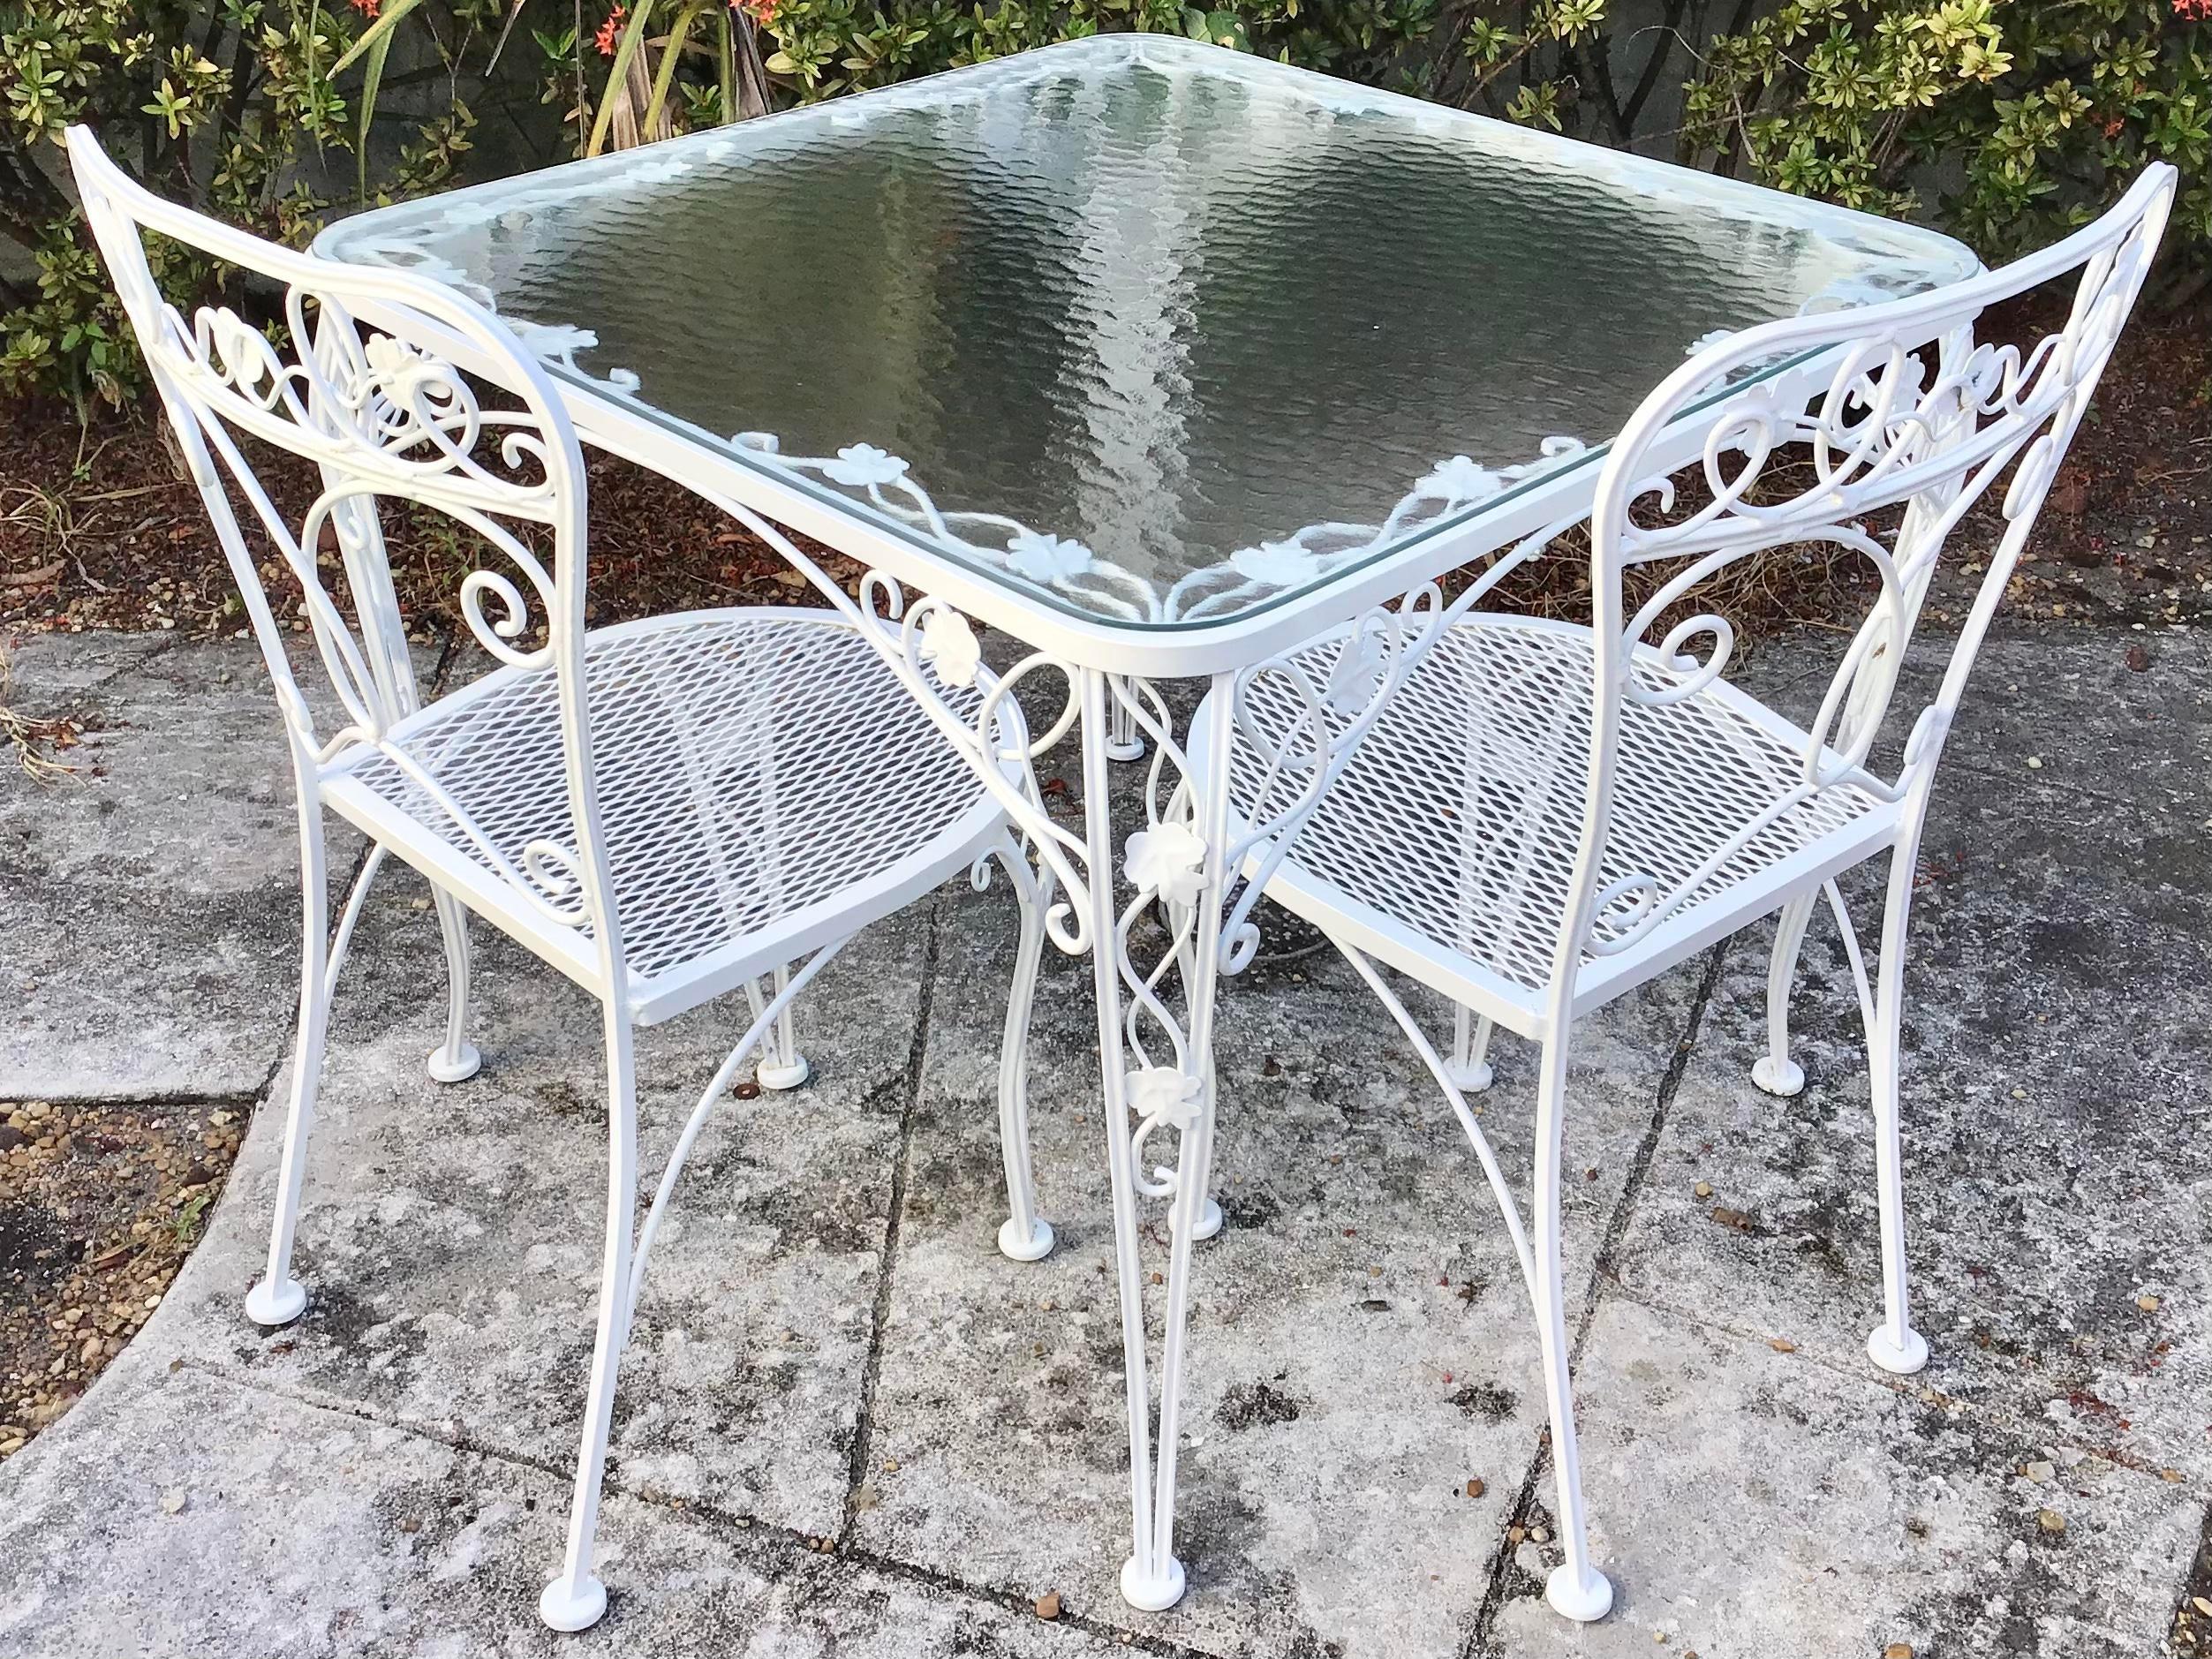 Fabulous salterini patio dining table and pair of chairs freshly lacquered in white with a glass top. This is sold as a set of 3. Add it to your outdoor garden or by the pool.

Additional dimensions:

-Table: 35